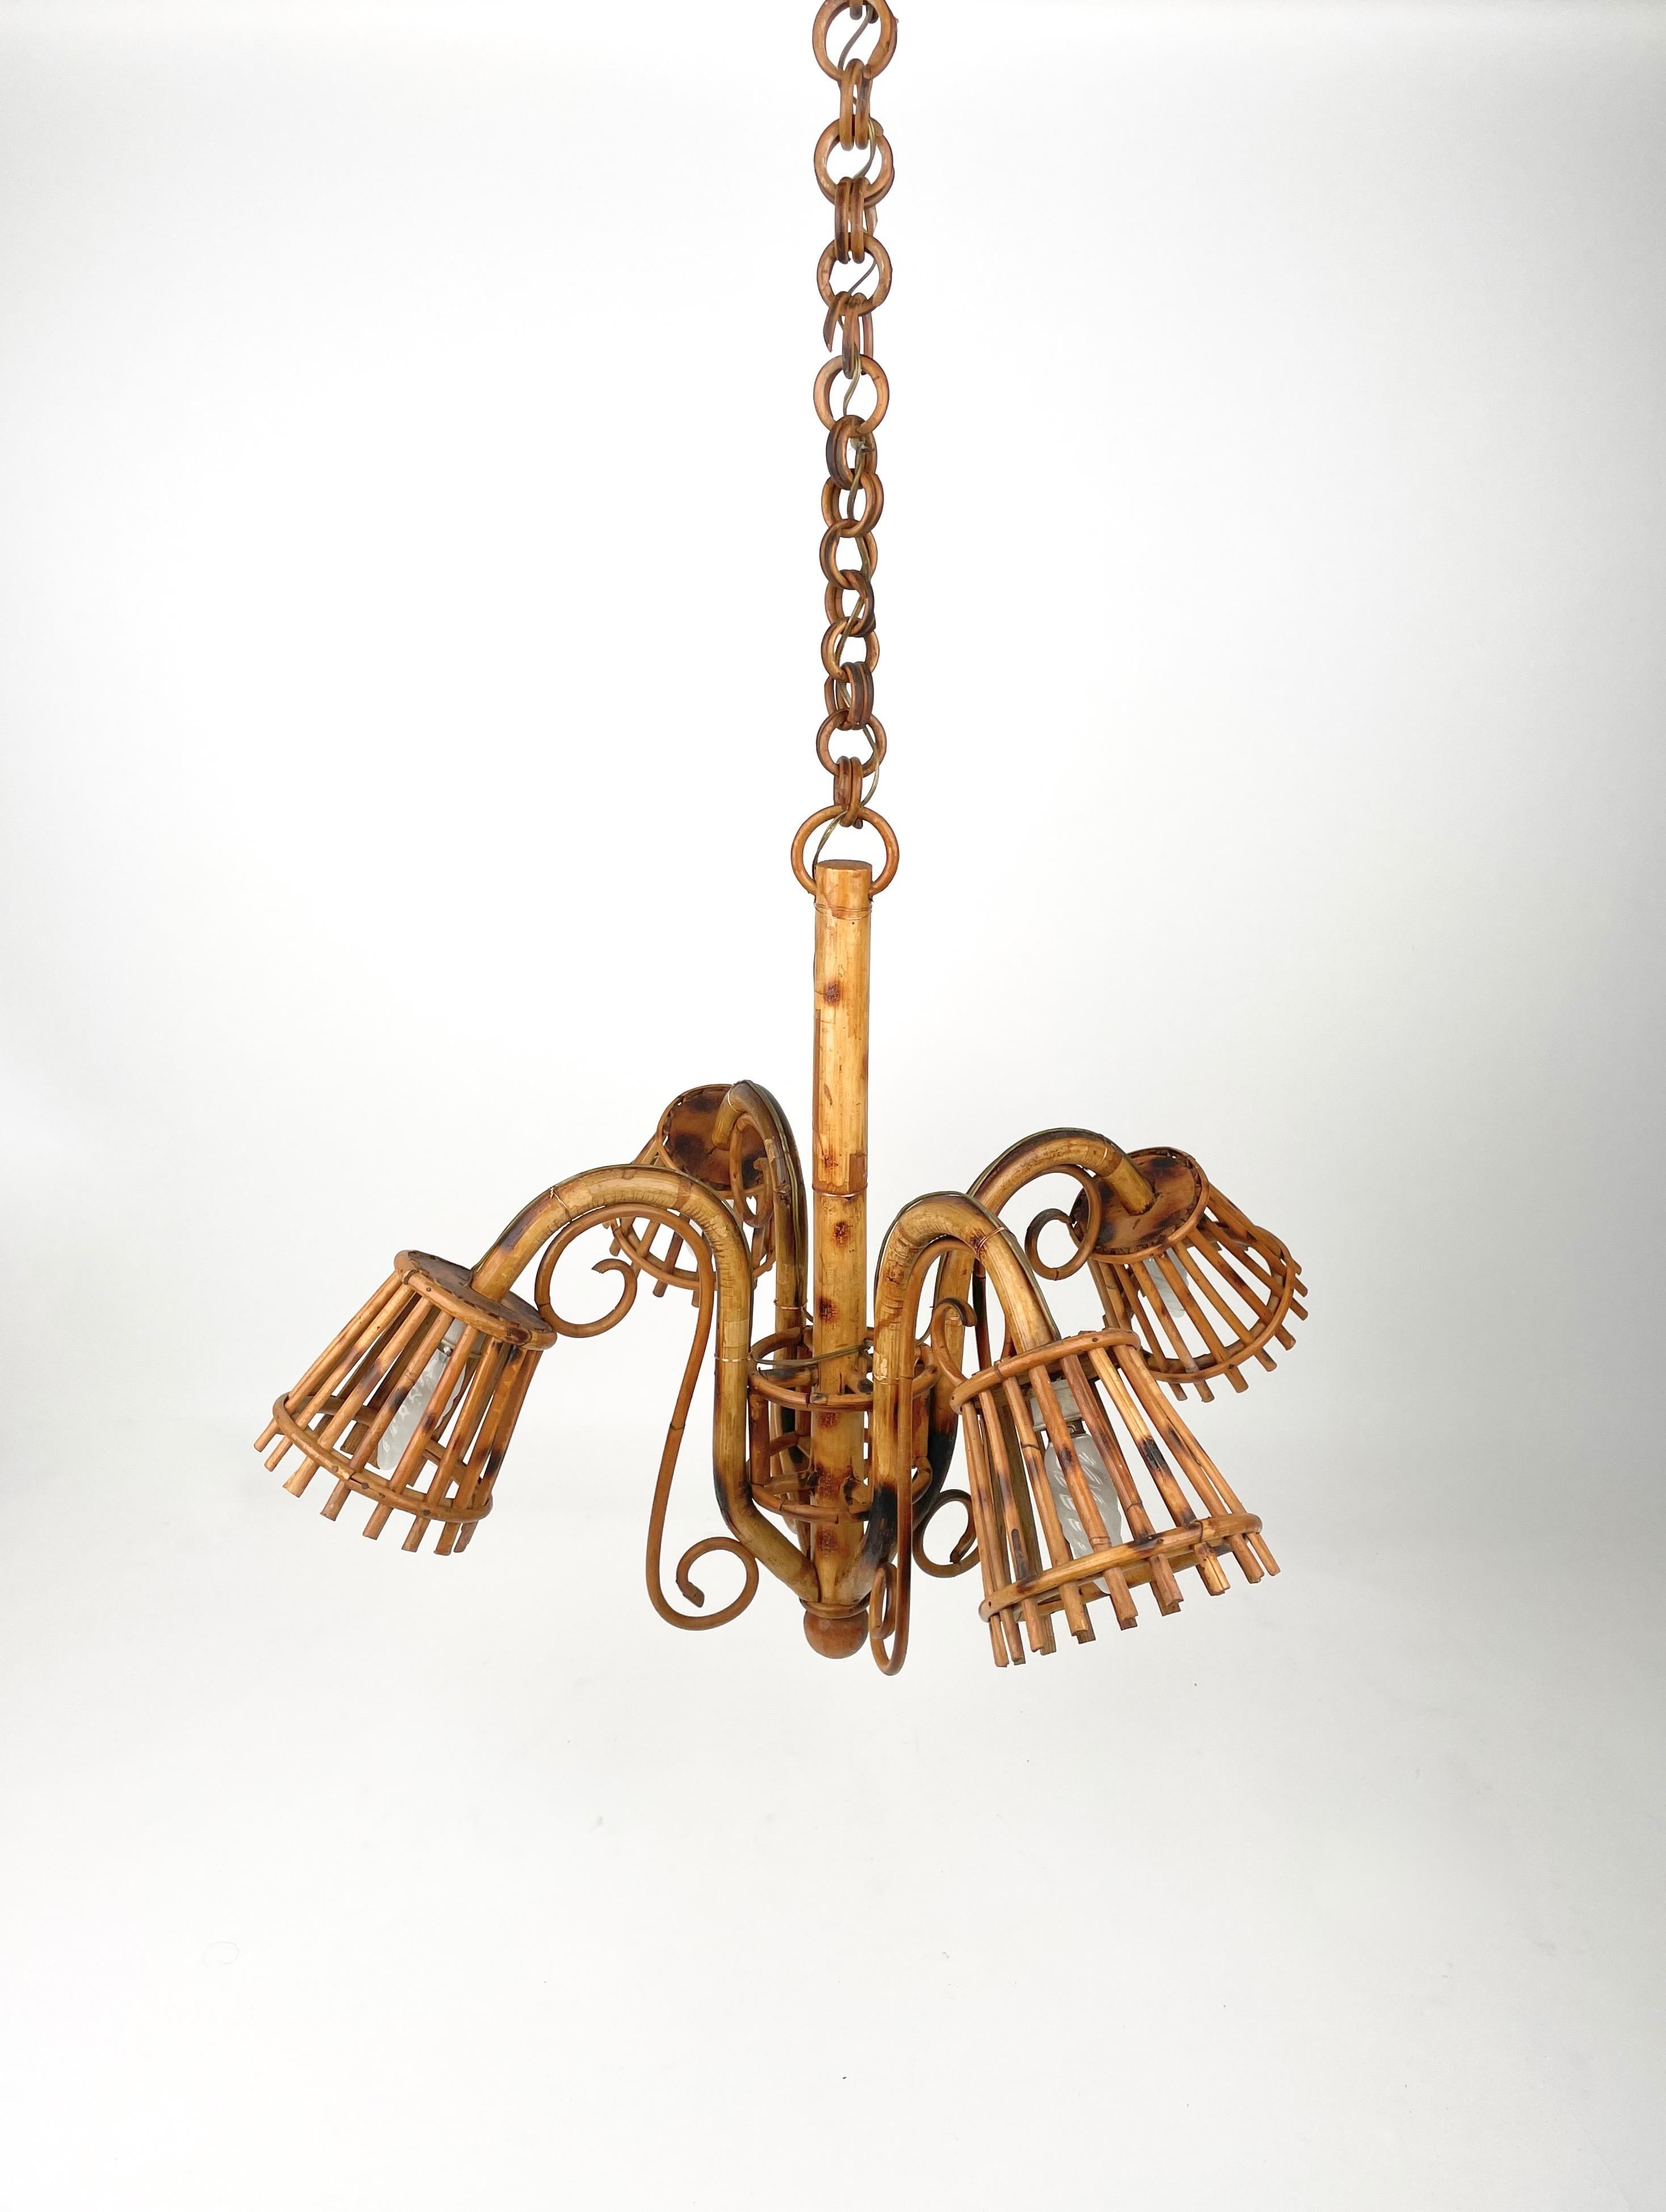 1960s chandelier pendant in bamboo and rattan featuring four lights in the style of French designer Louis Sognot. 

Measures: Height without chain: 50 cm
Diameter: 65 cm


Louis Sognot was a French designer best known for his elegant furniture